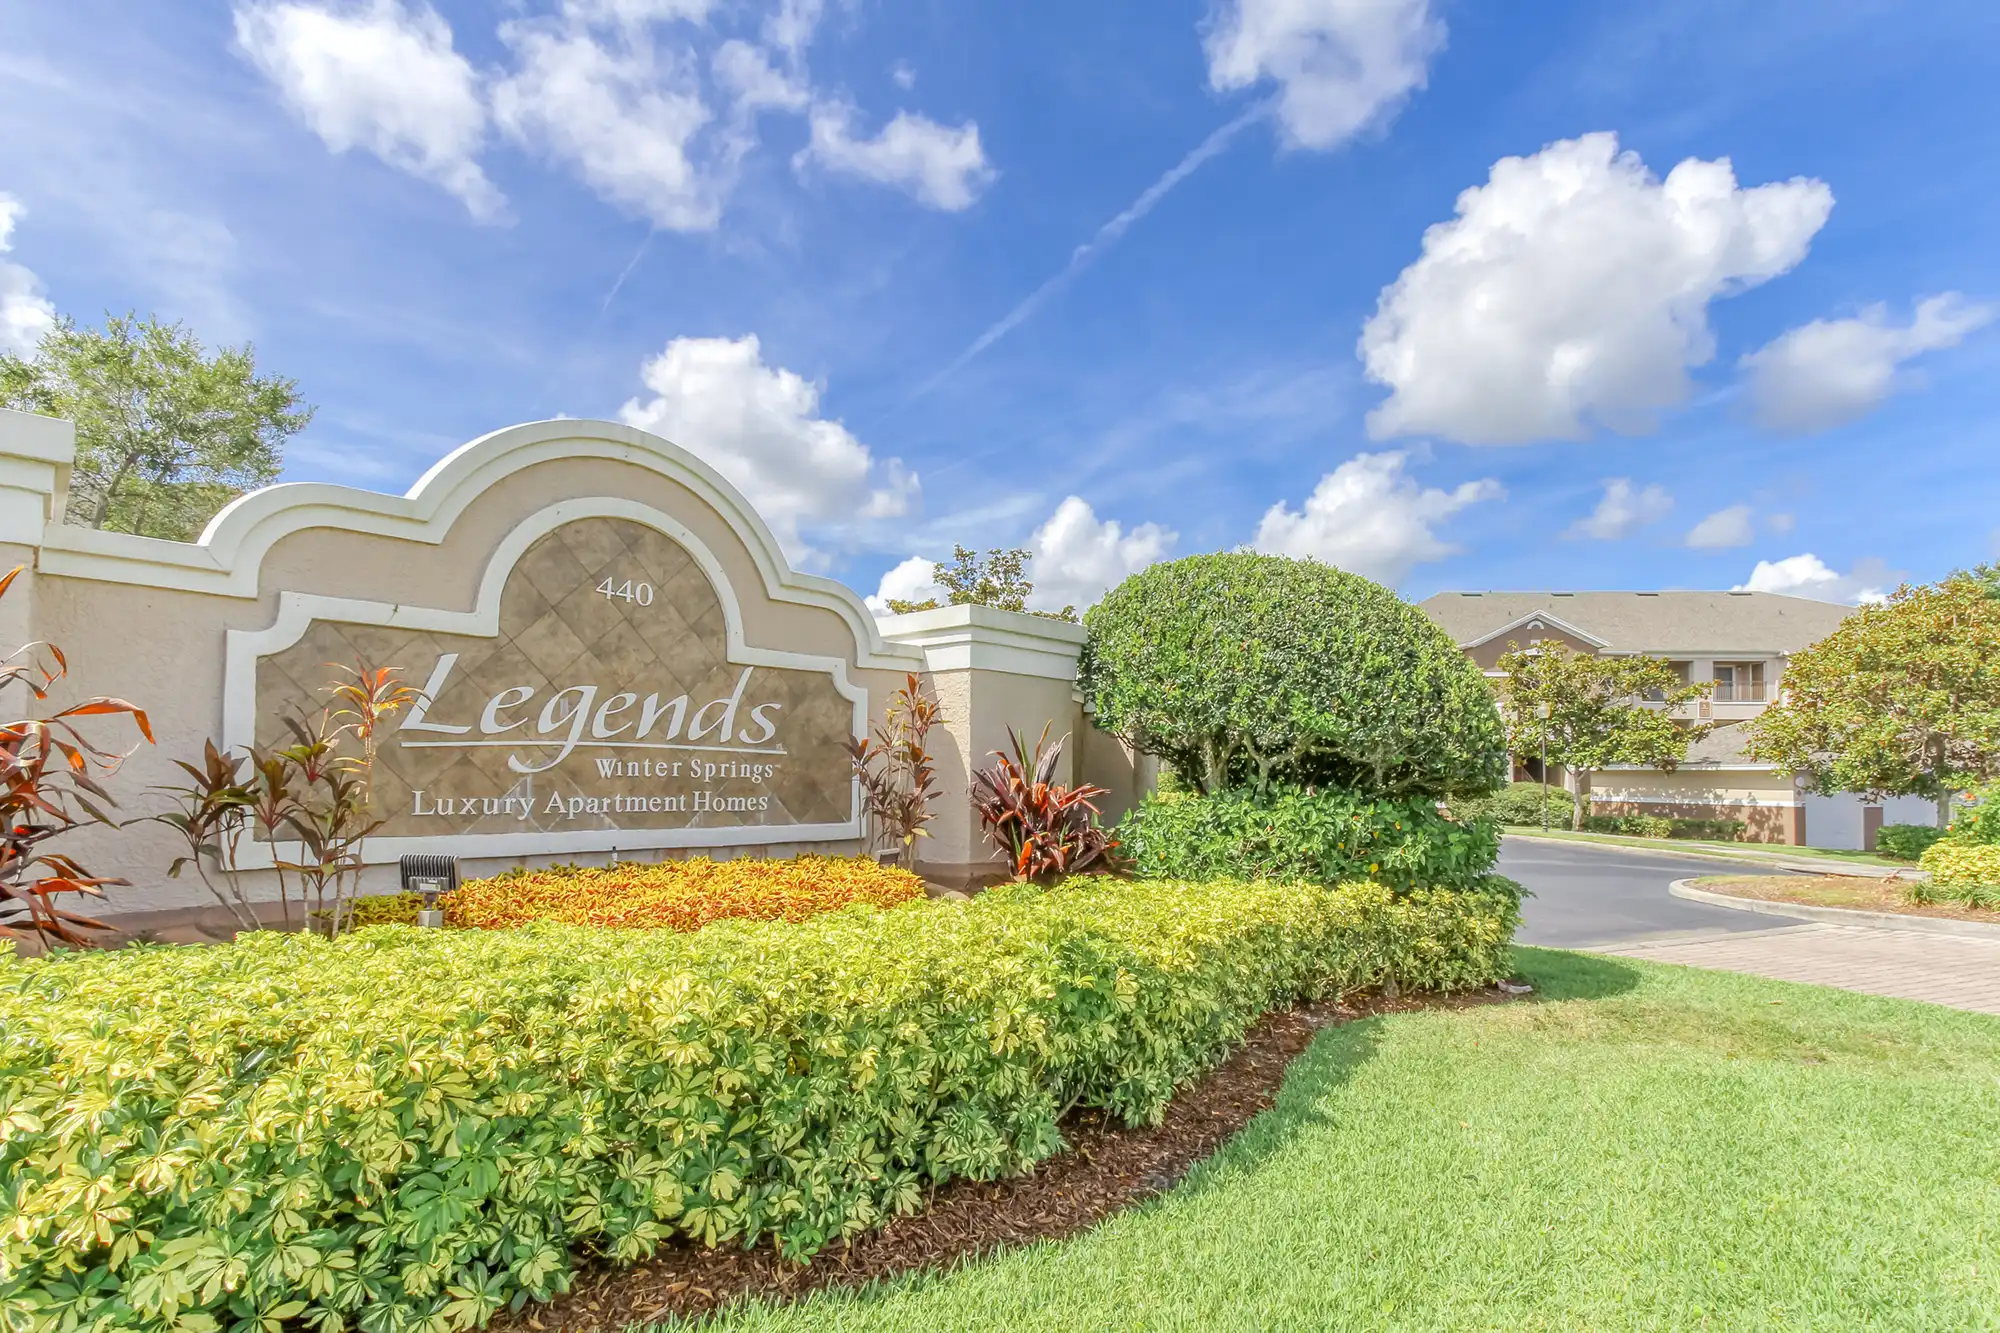 Legends at Winter Springs - Professional Real Estate Photography, Orlando, FL